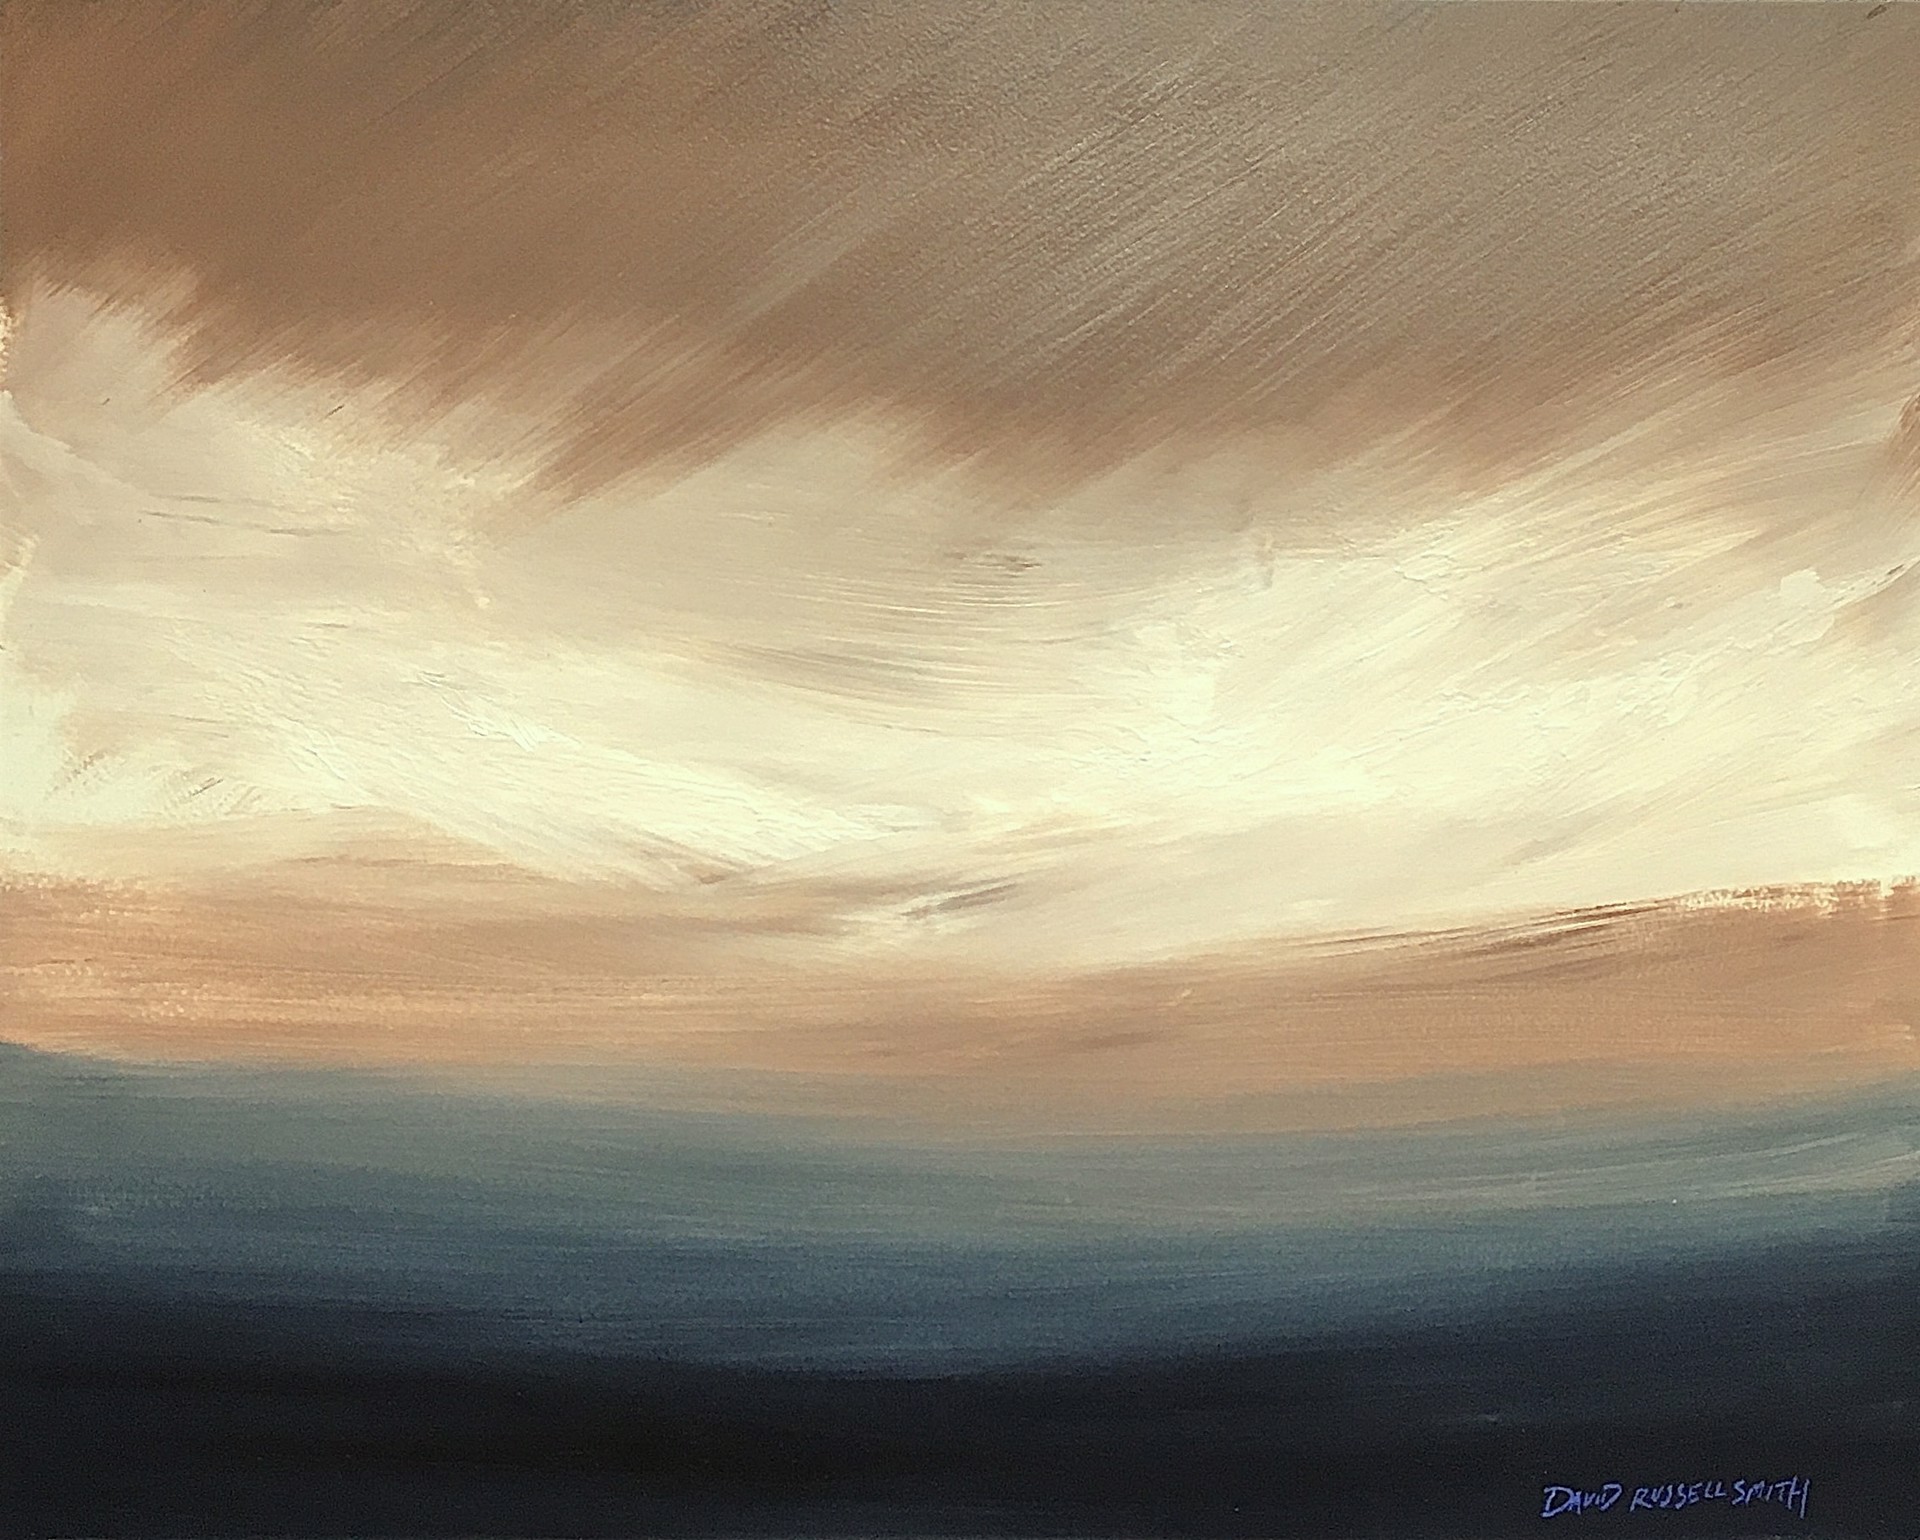 Surreal Skies, No. 8 by David Russell Smith